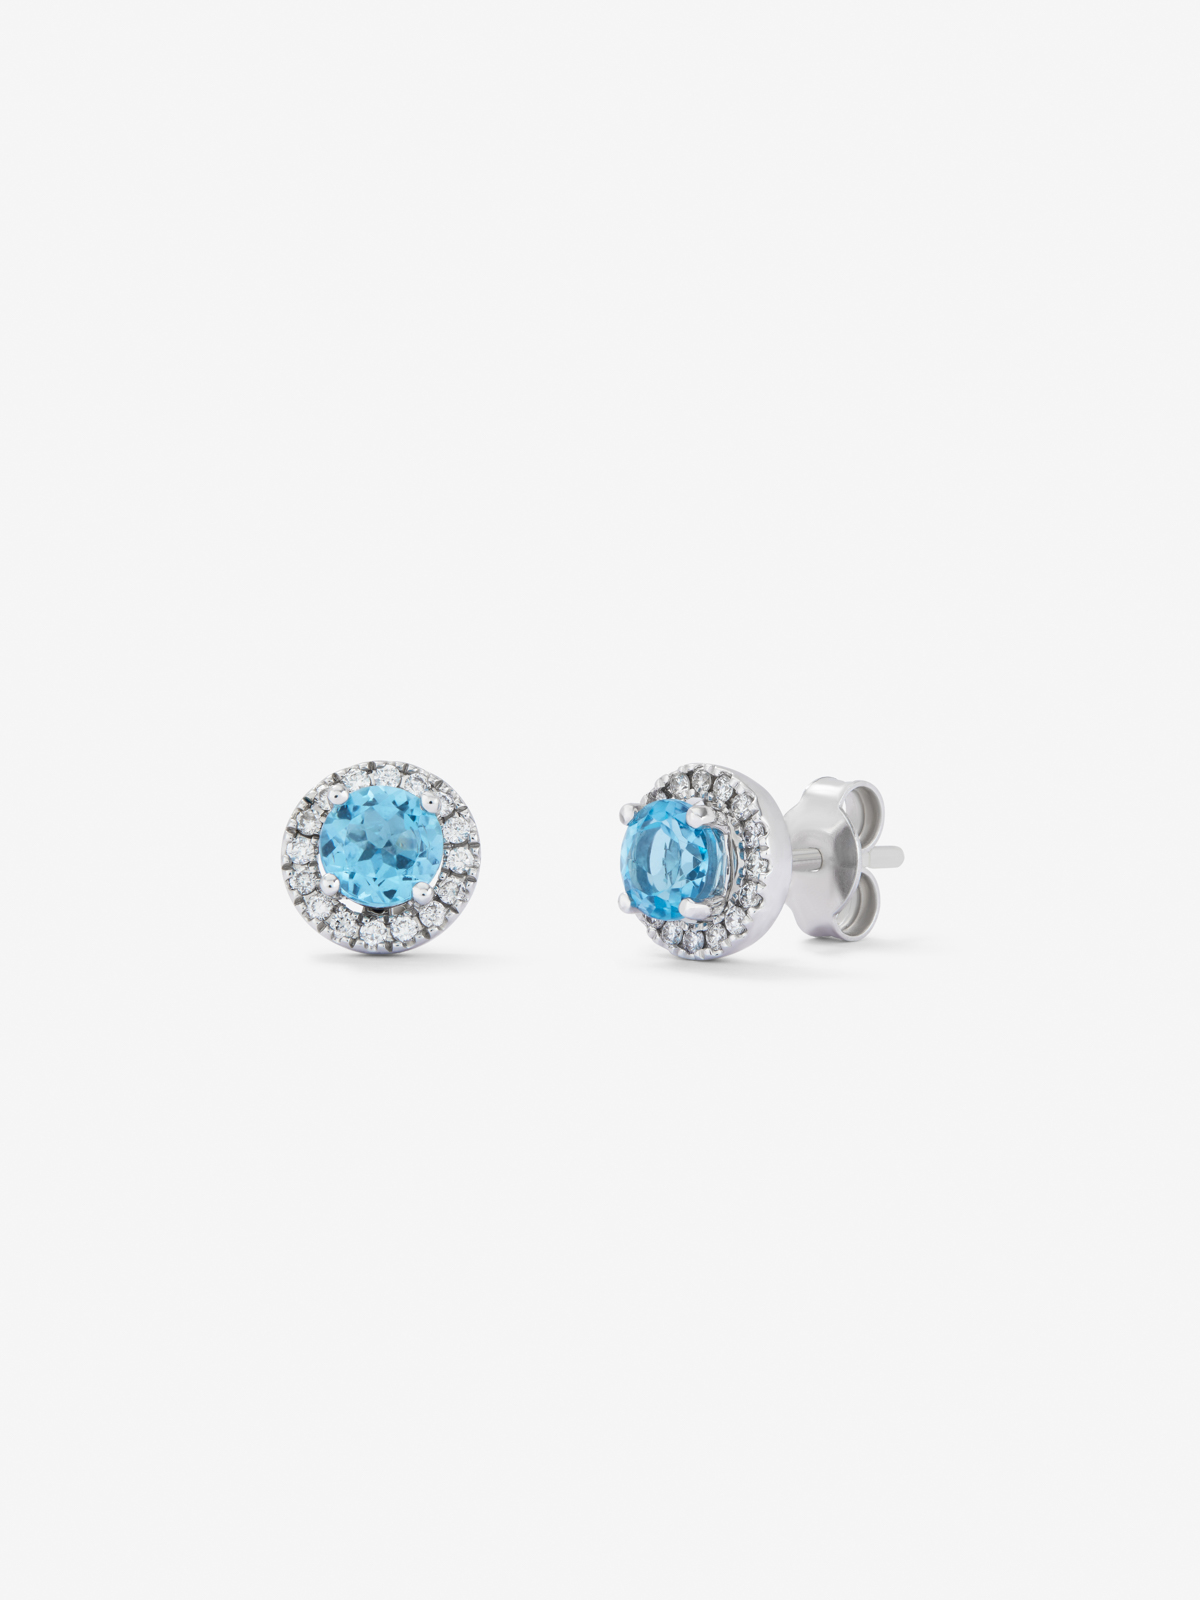 18K White Gold Button Earrings with Topaz and Diamond